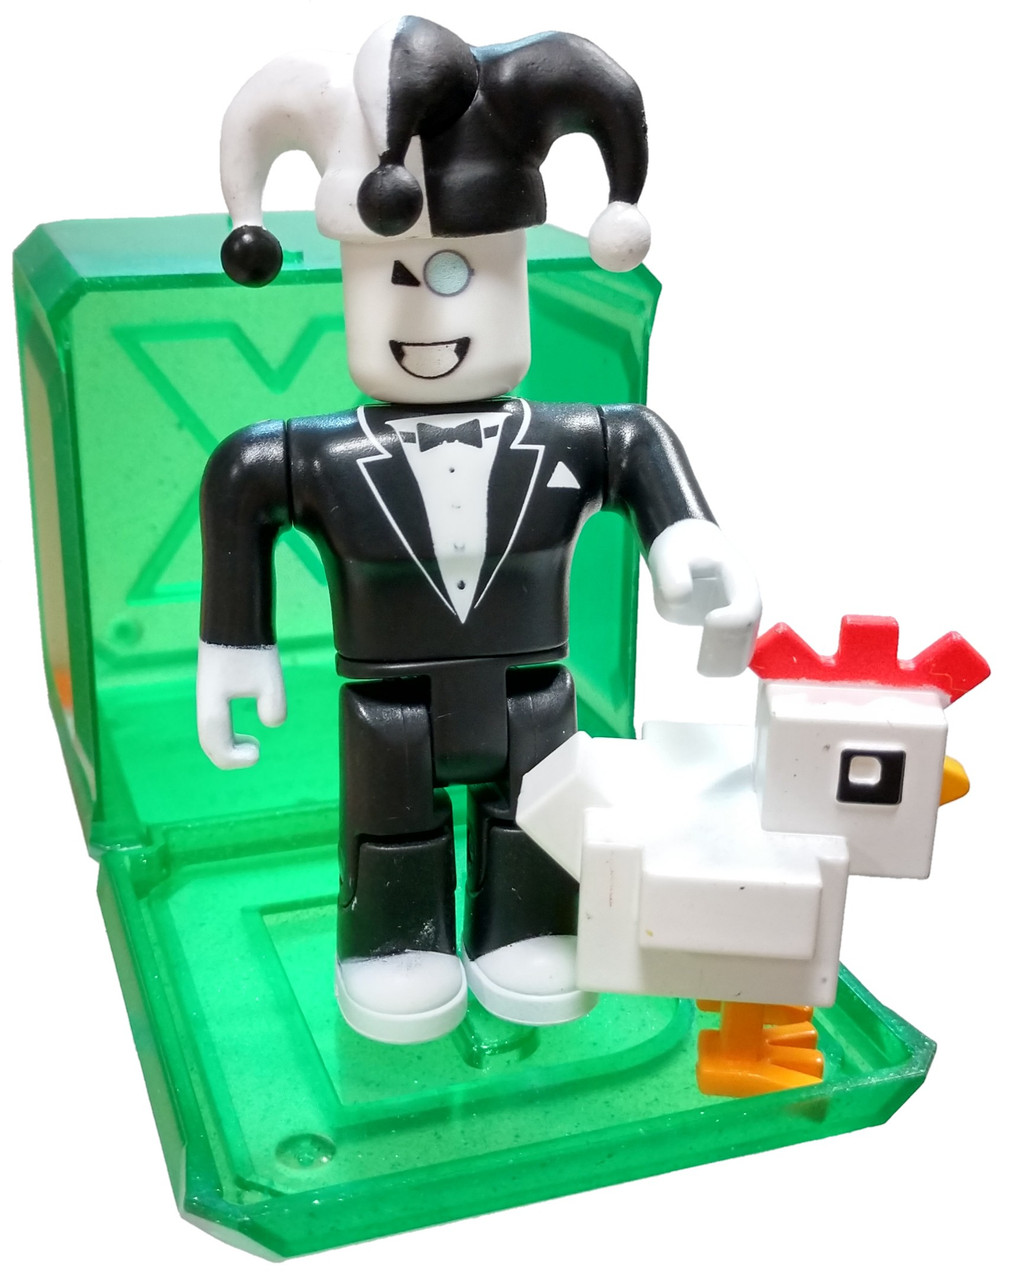 Roblox Celebrity Collection Series 4 Sirming 3 Mini Figure With Green Cube And Online Code Loose Jazwares Toywiz - roblox celebrity collection series 2 ninja assassin pizza pack